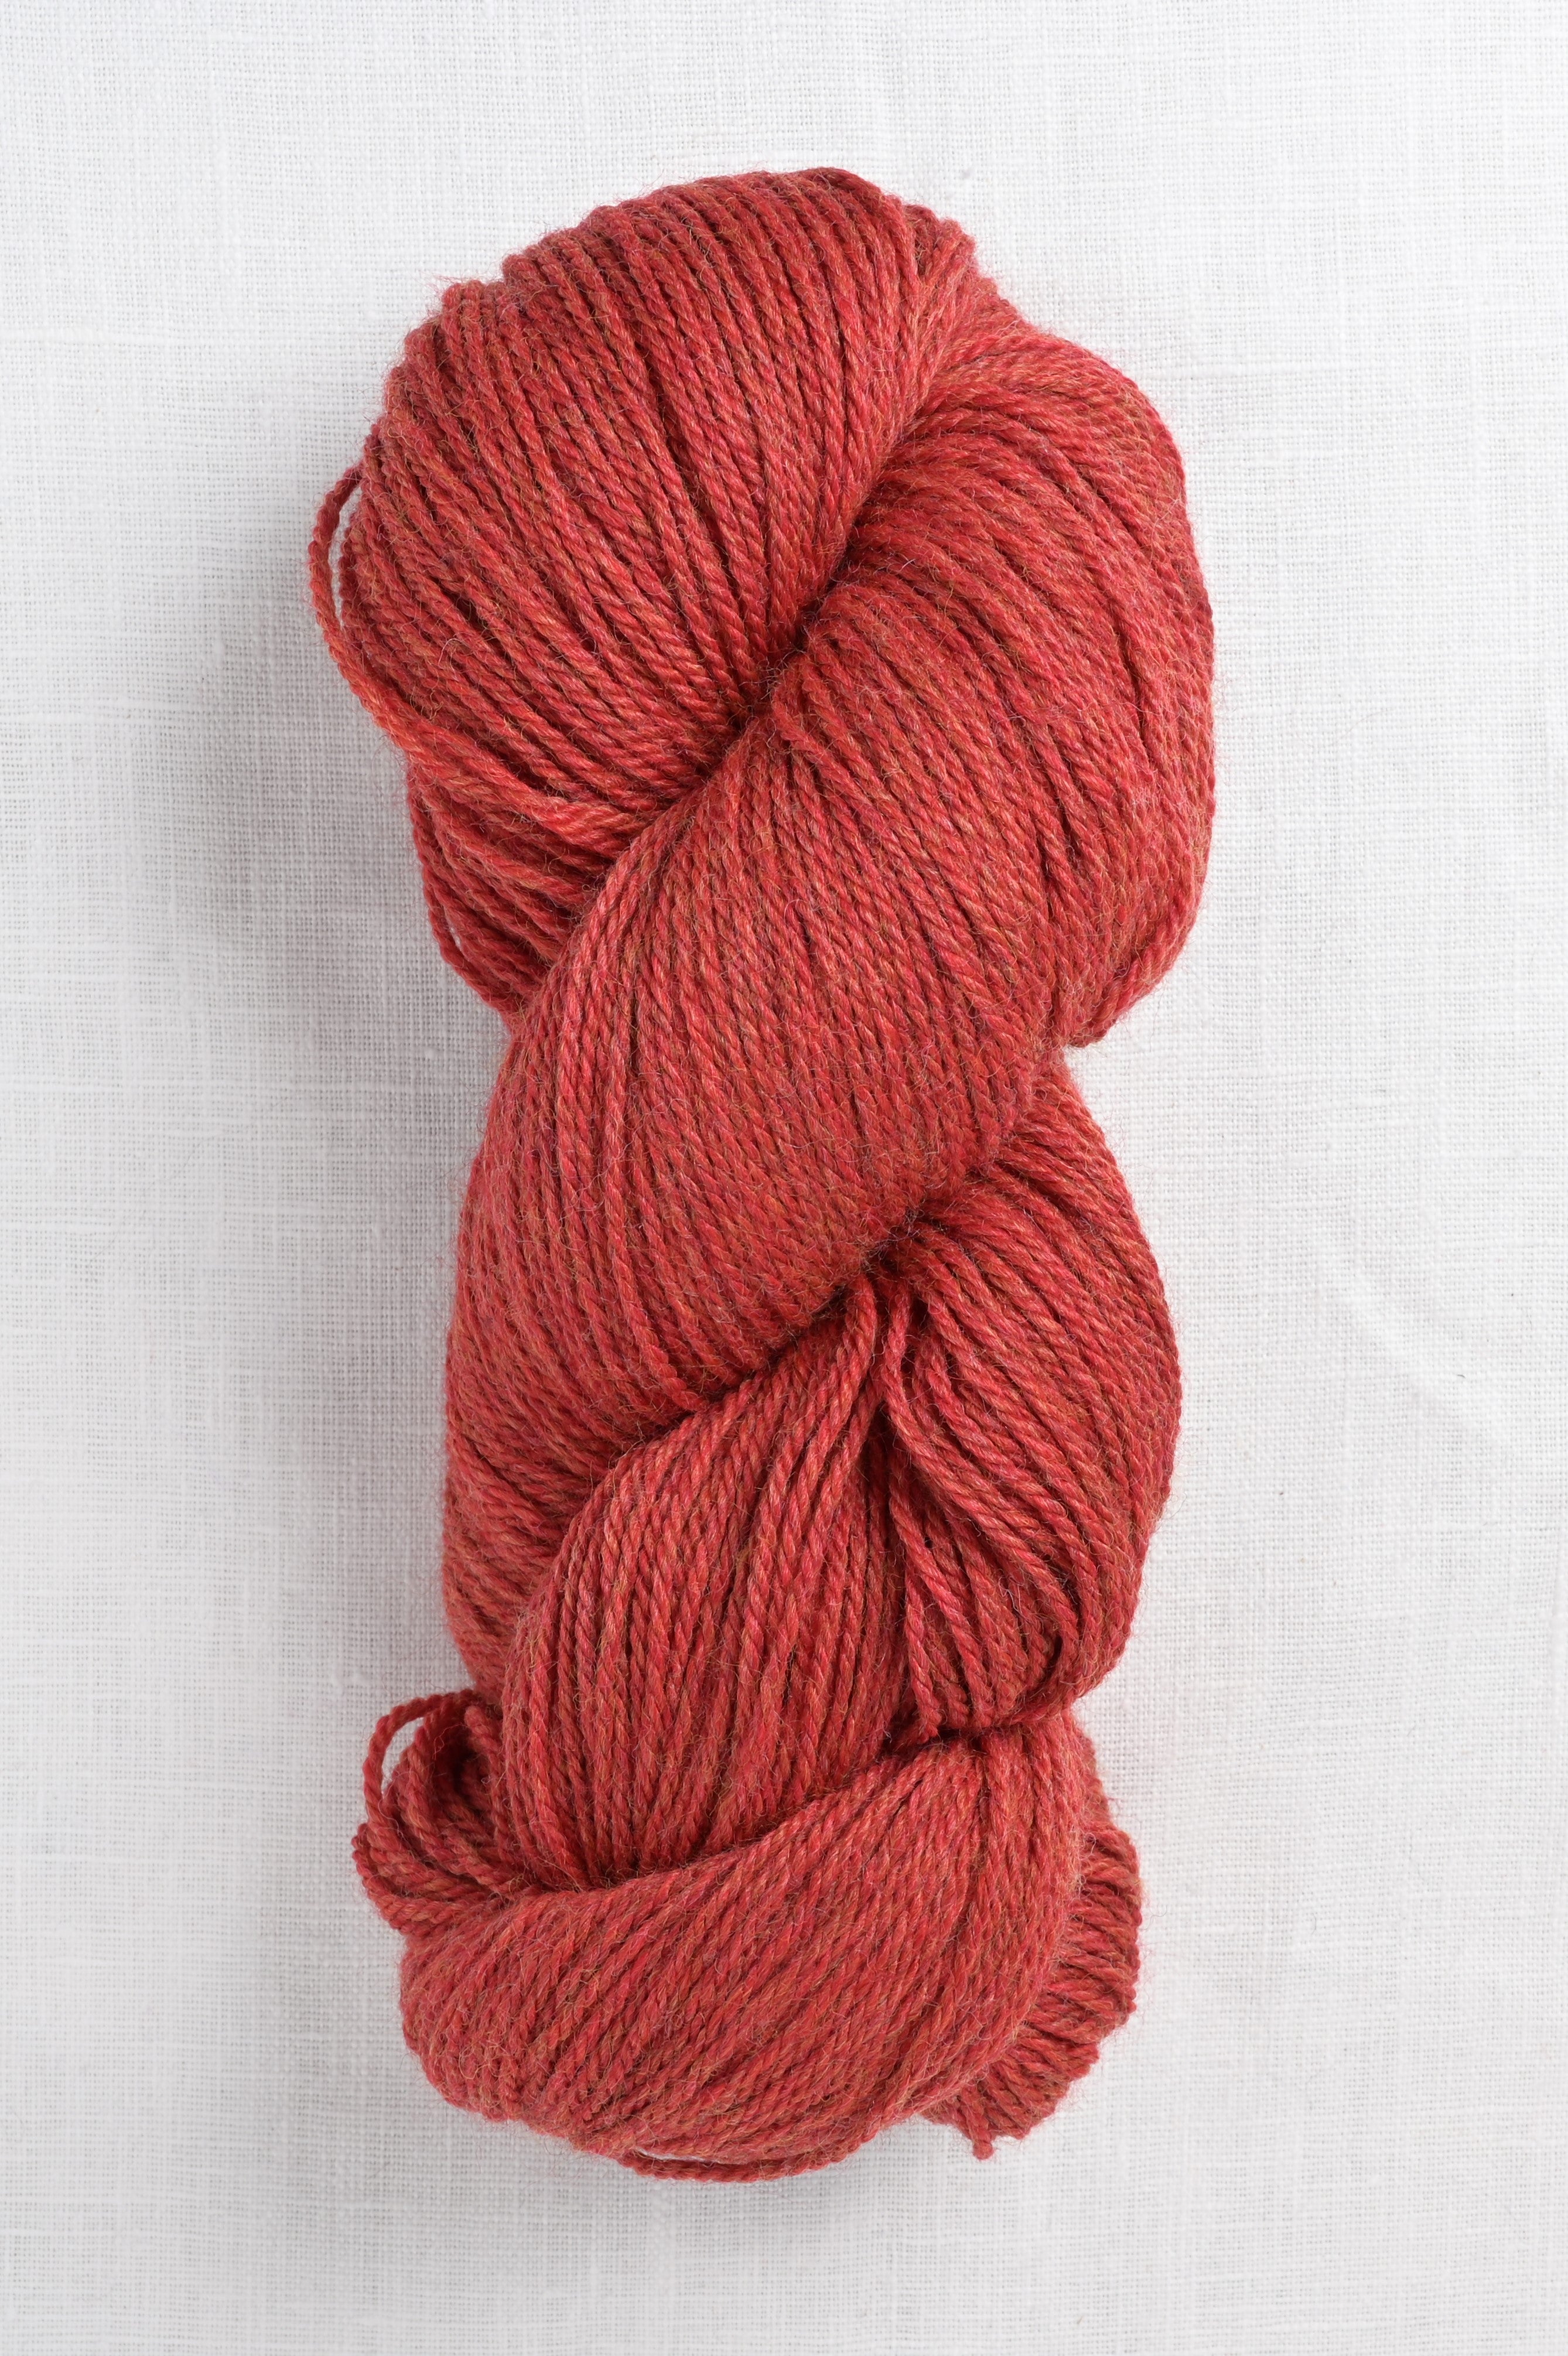 Berroco Vintage DK 2173 Wool Company and Pepper – Red